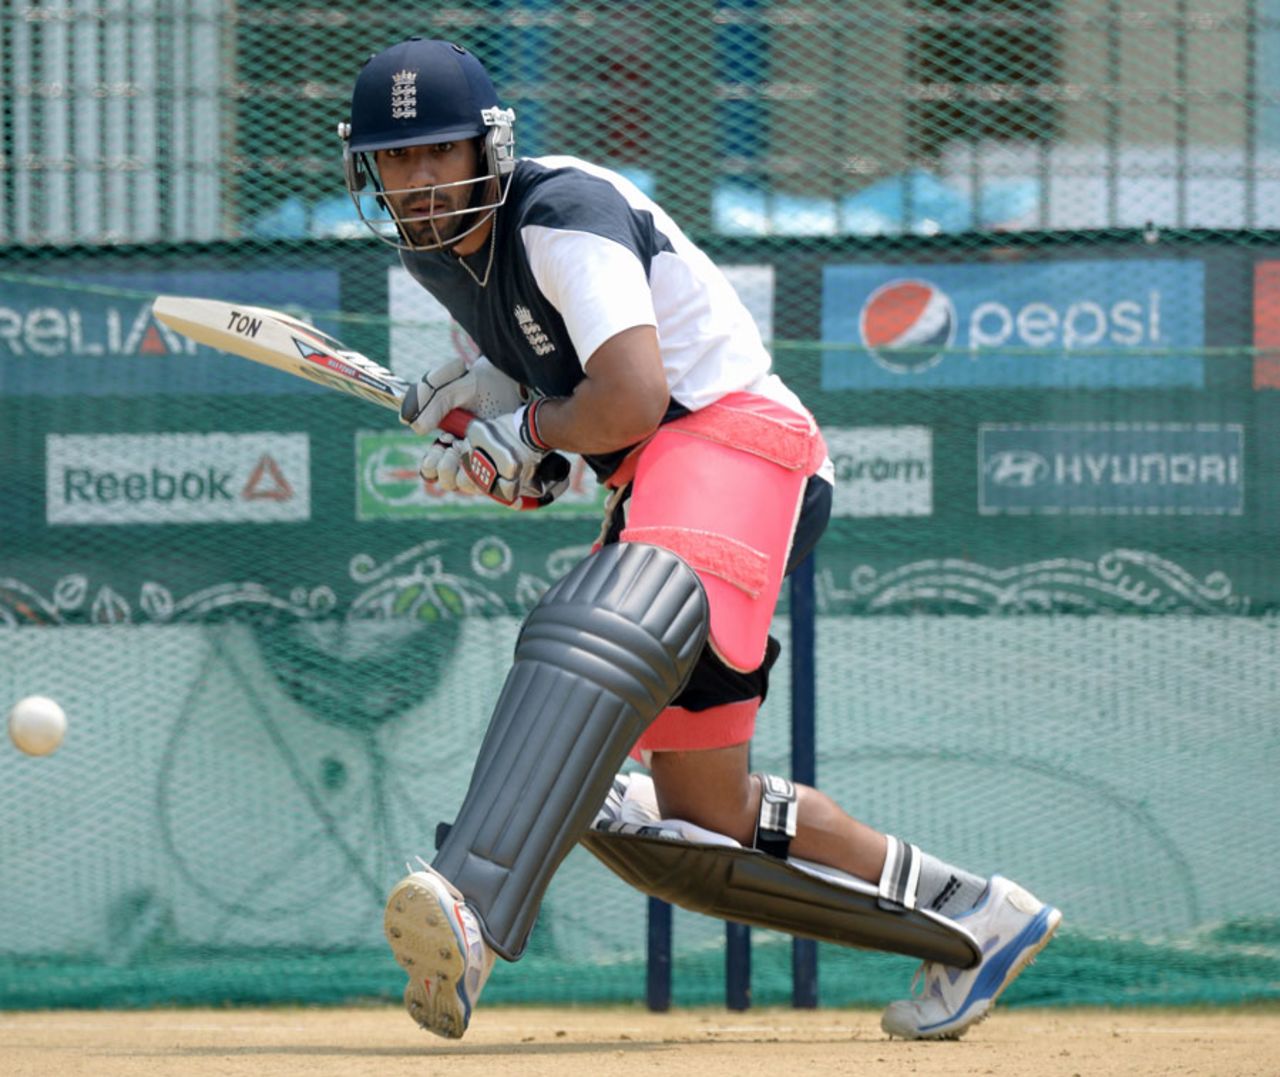 Eyes on the prize: Ravi Bopara has a hit in the nets, Chittagong, March 26, 2014